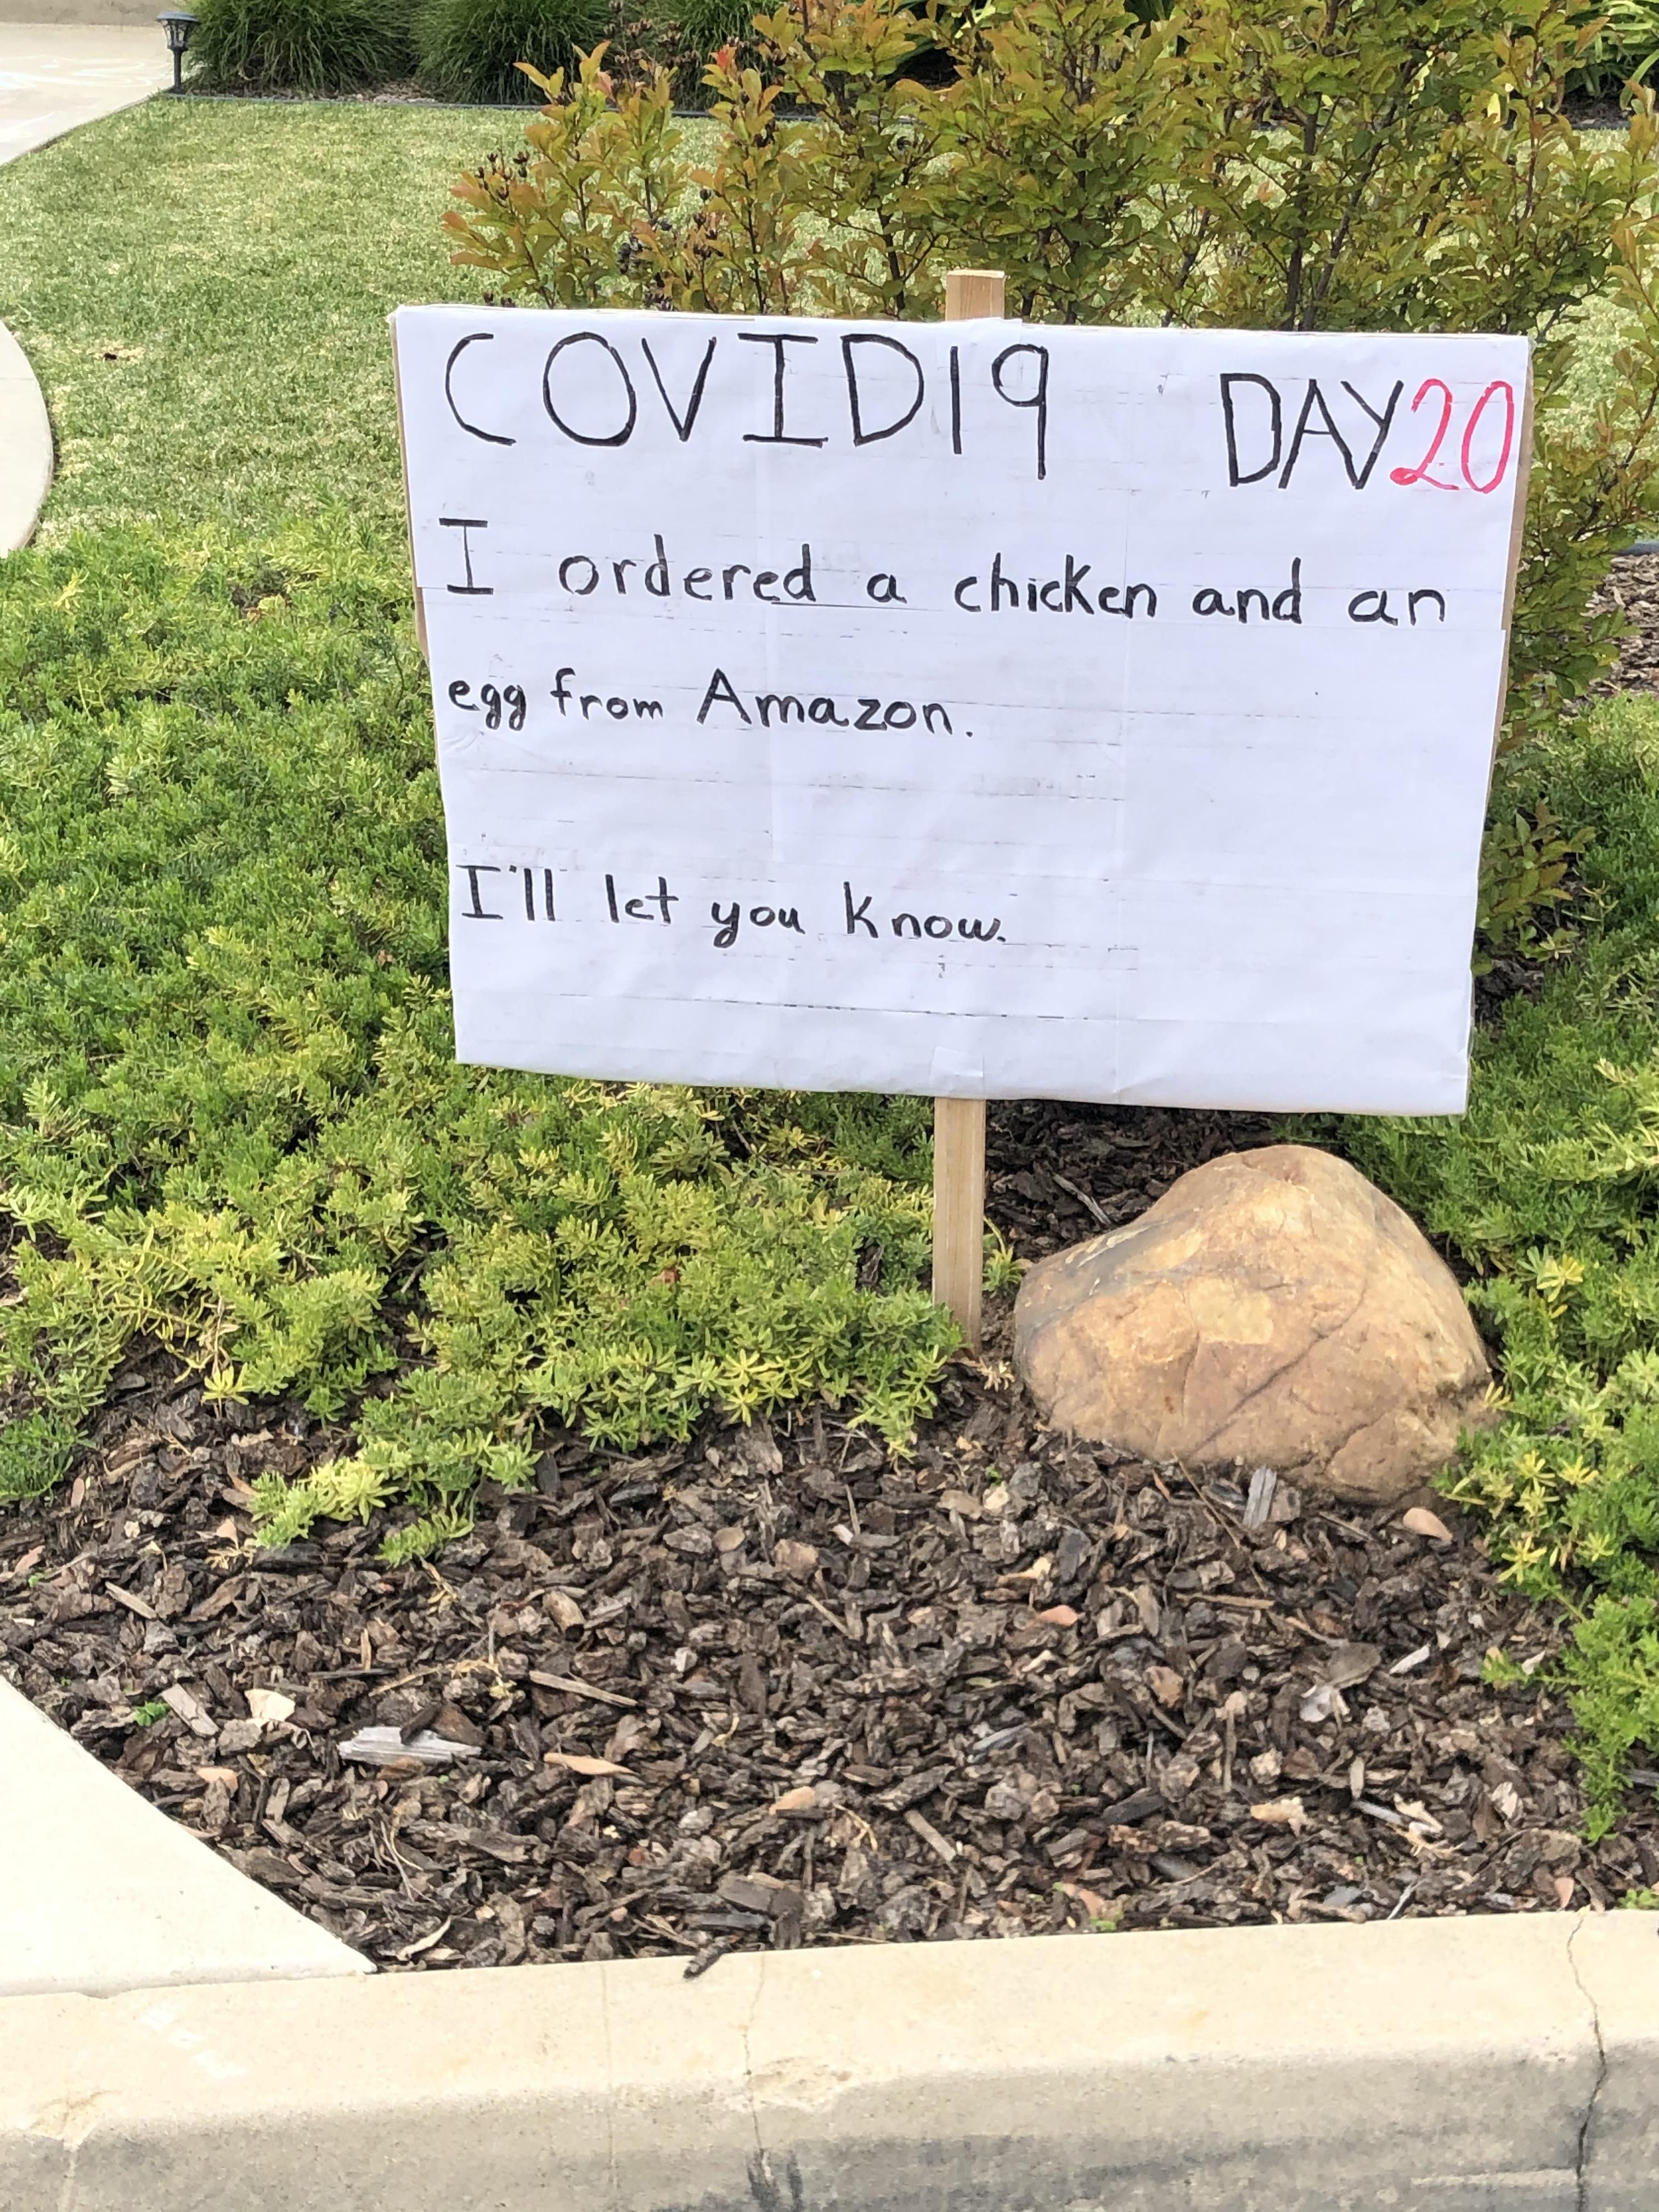 My neighbors been posting daily dad jokes on his lawn since the lockdown started in LA. Here’s #20